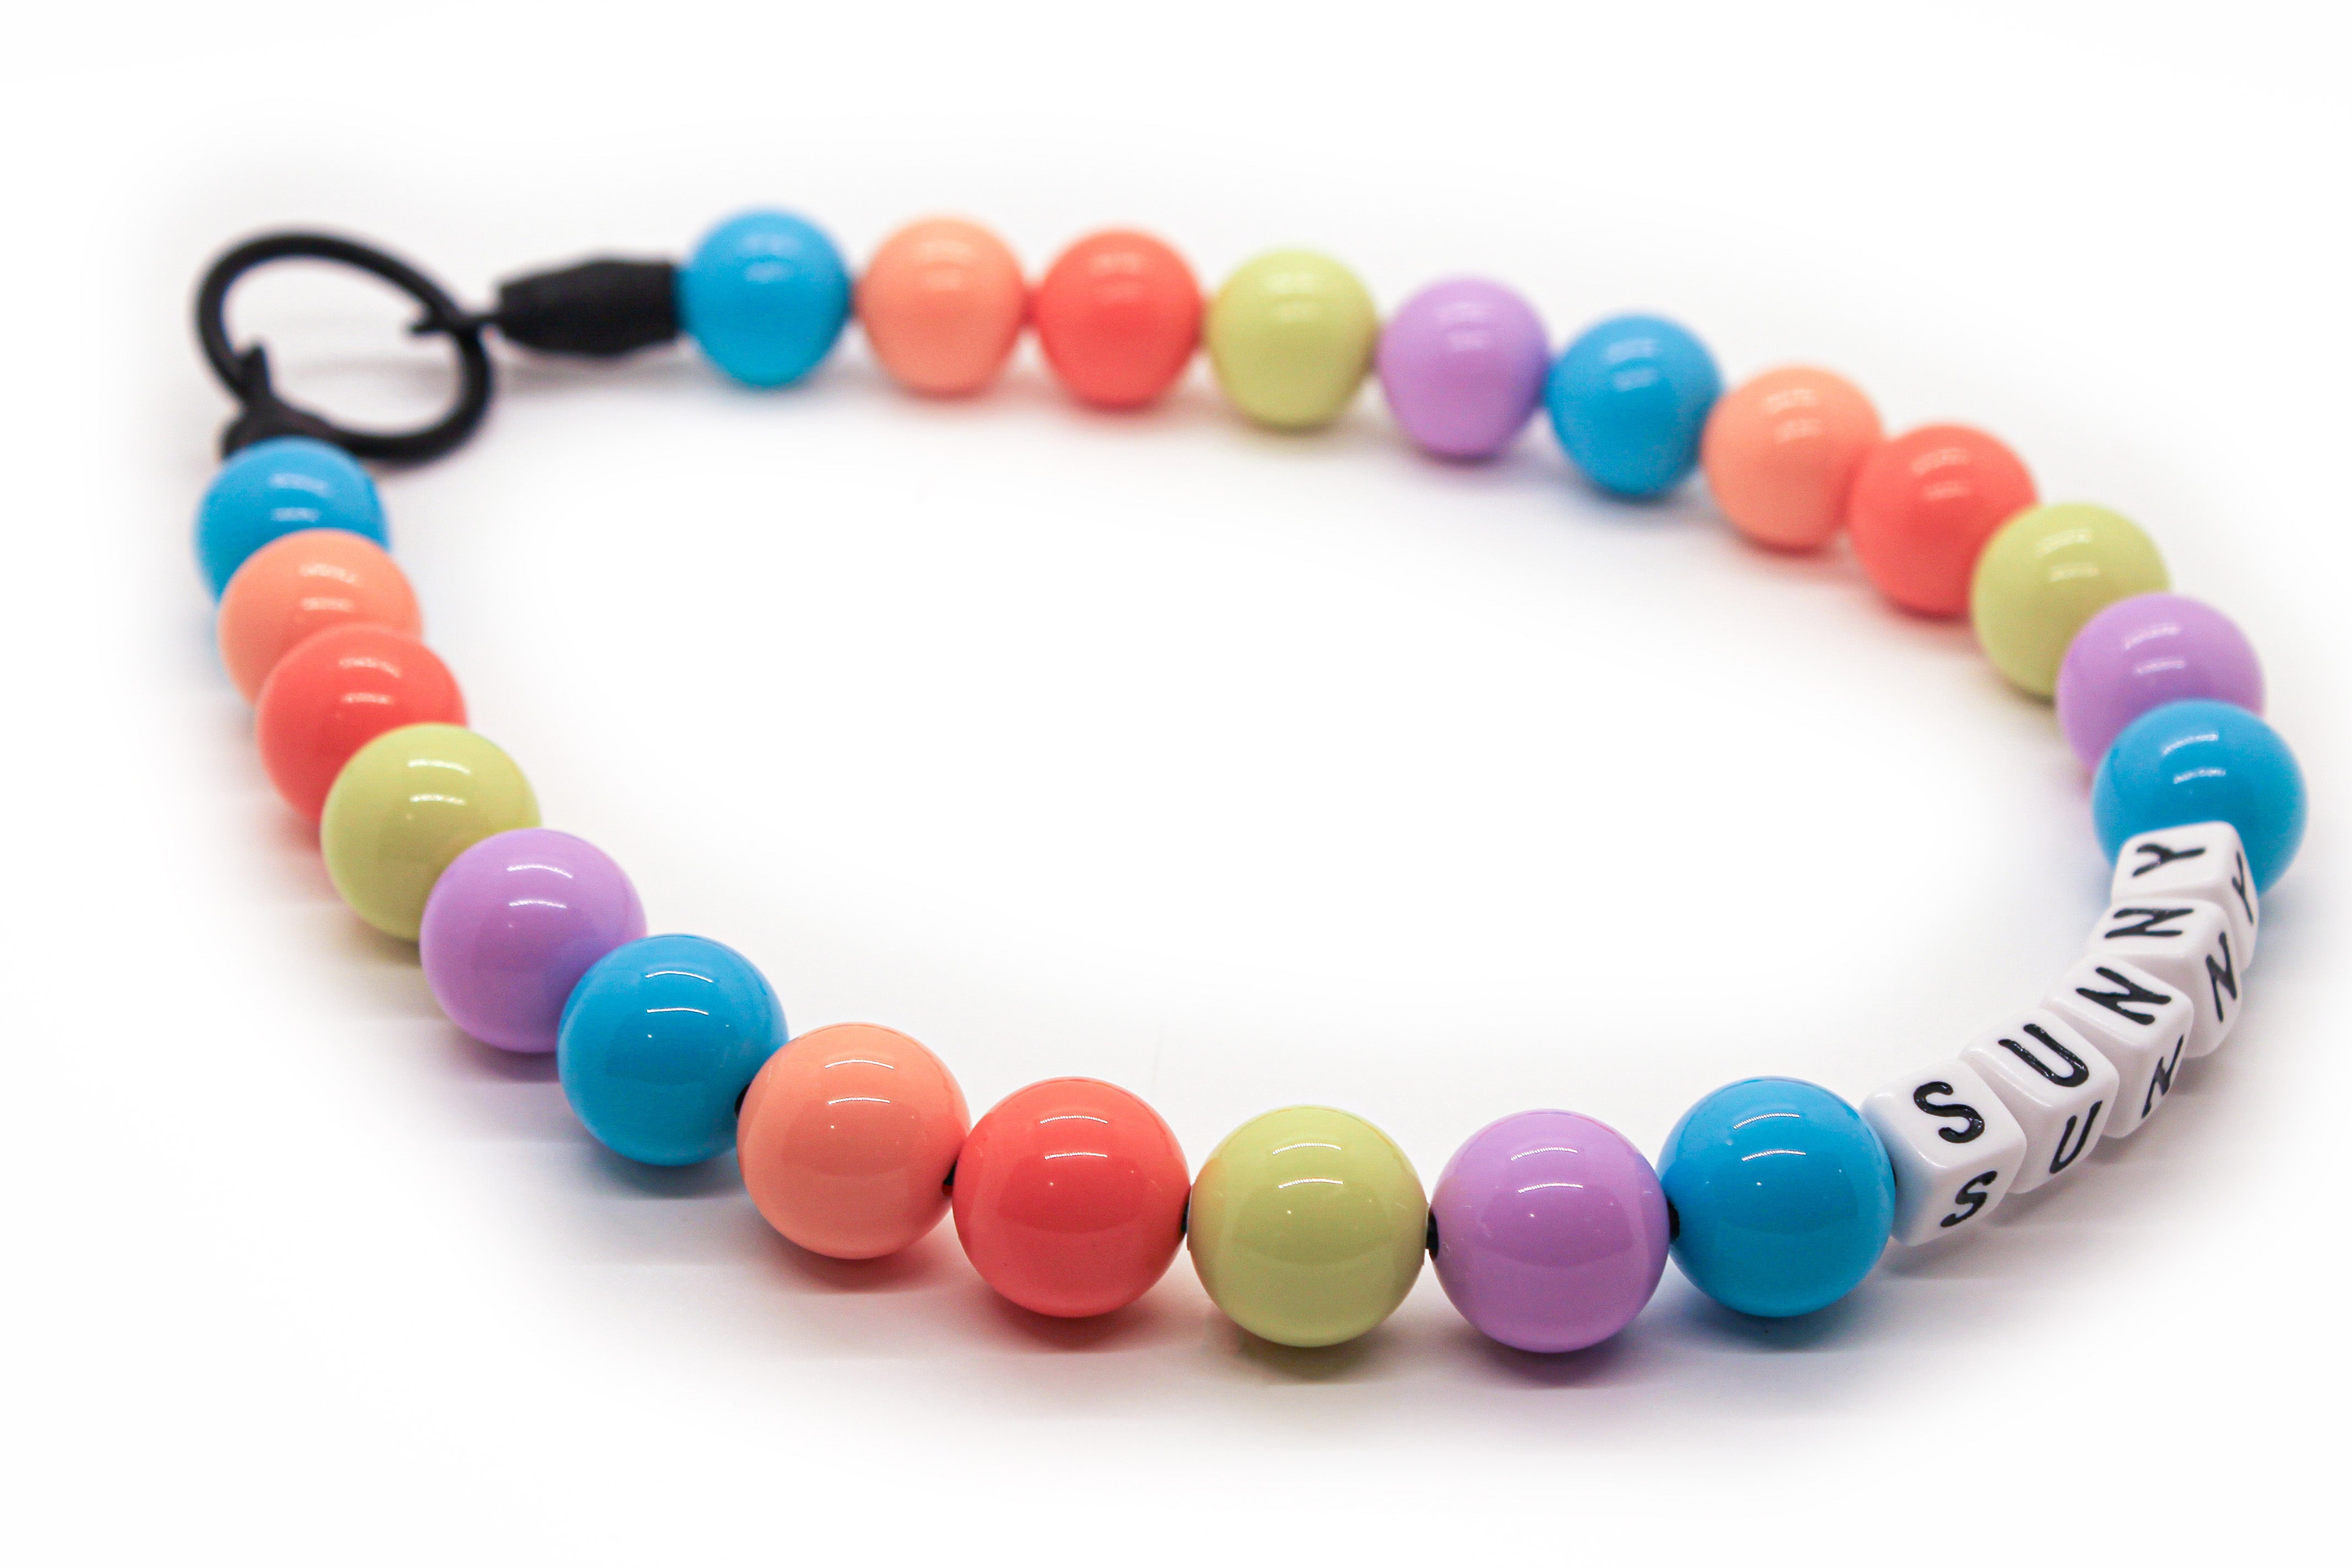 Pastel Ombre Large Bead Dog Collar